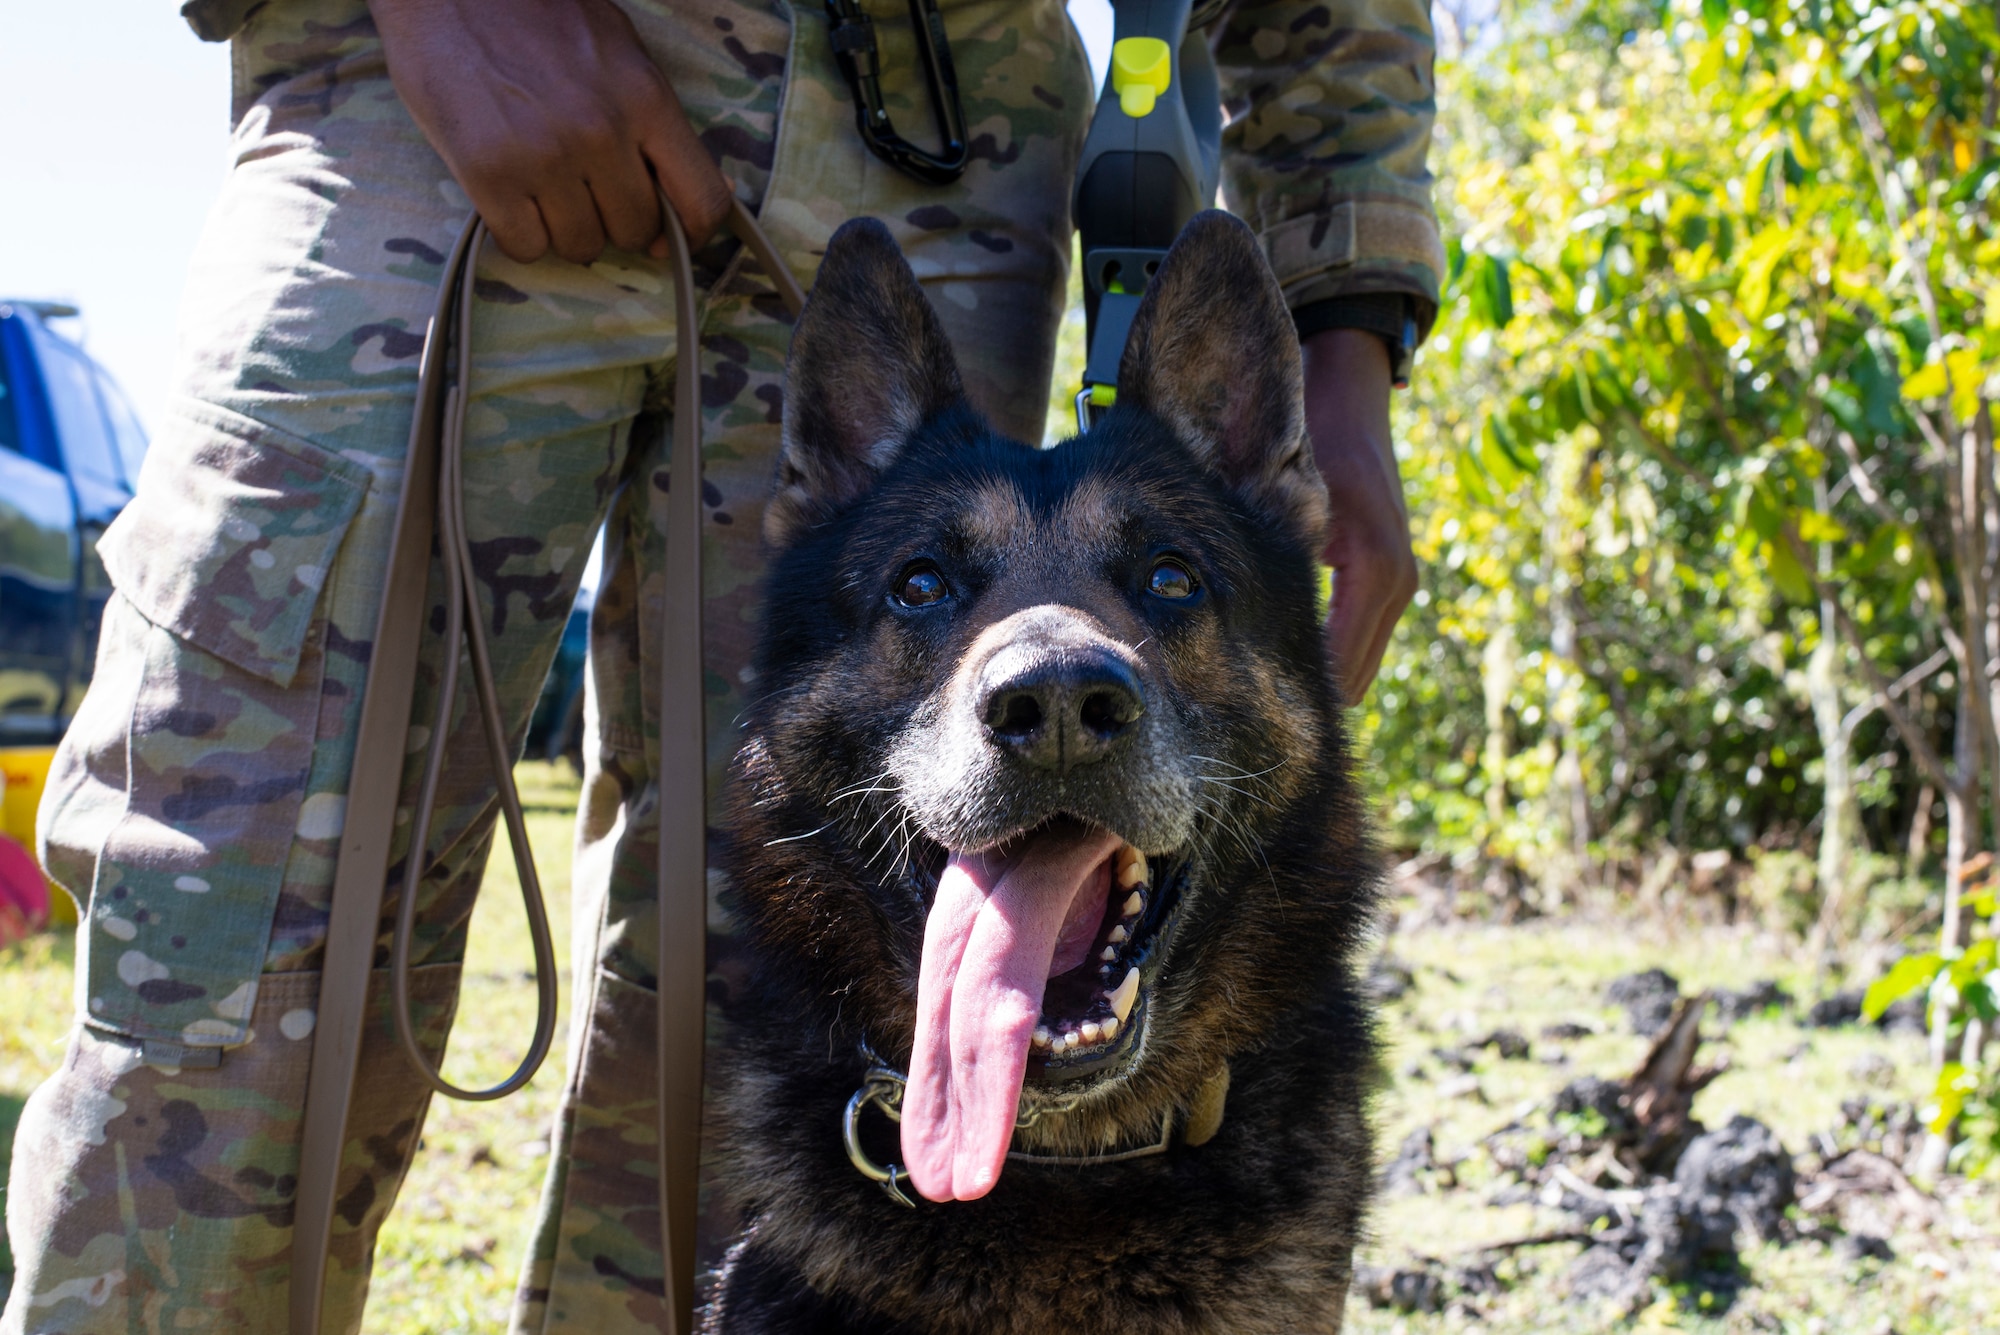 Lazo and his handler, Staff Sgt. Jailen Patrick, 36th Security Forces Squadron, cool off in the shade during a pyro exercise on Andersen Air Force Base, Guam Nov. 20. Marines and Airmen exchanged MWD techiques to enhance joint mission effectivness. (U.S. Air Force photo by Staff Sgt. Nicholas Crisp)